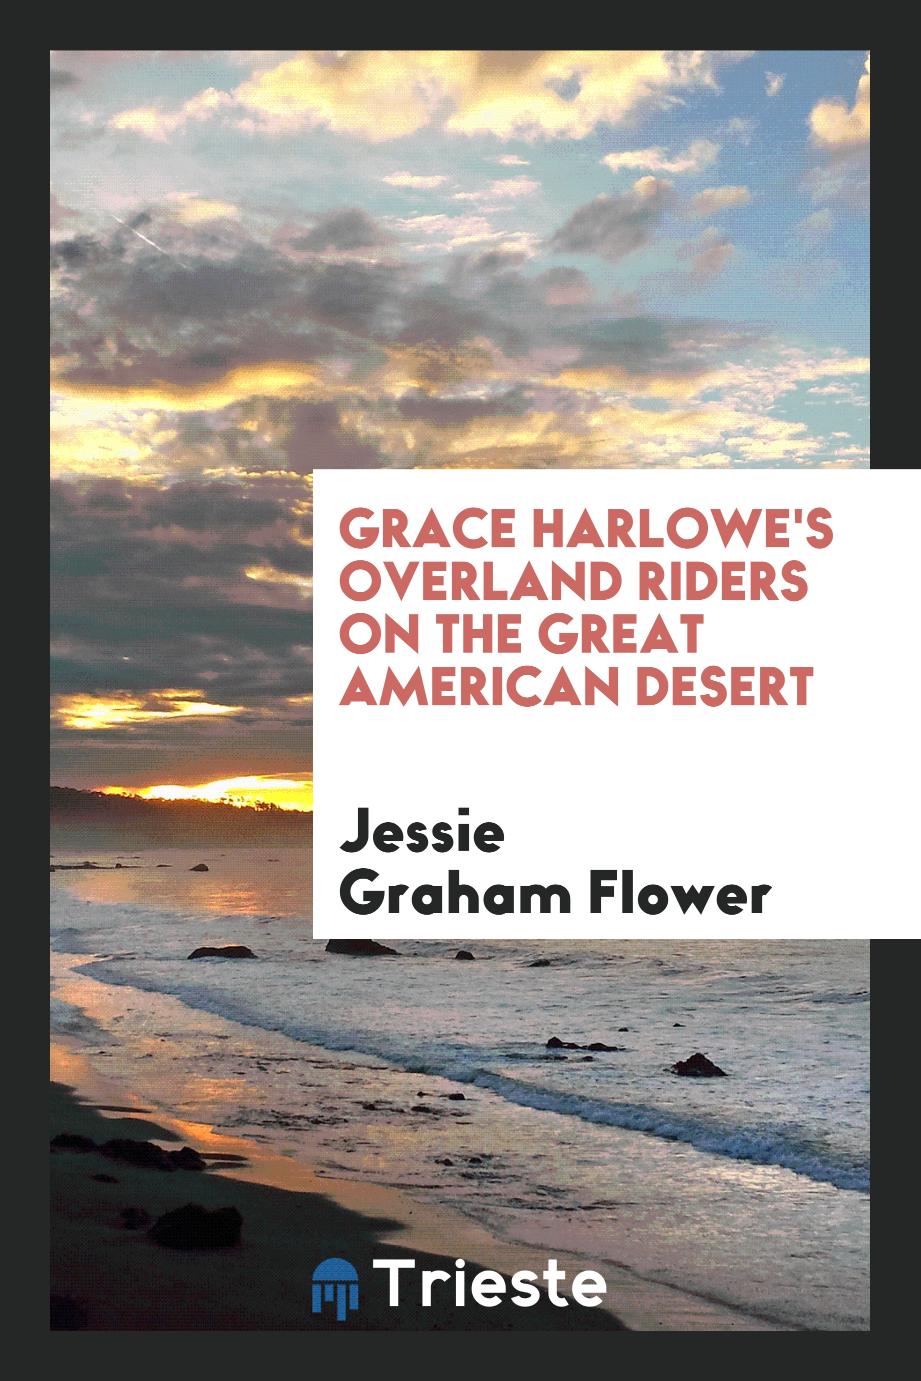 Grace Harlowe's overland riders on the great American desert